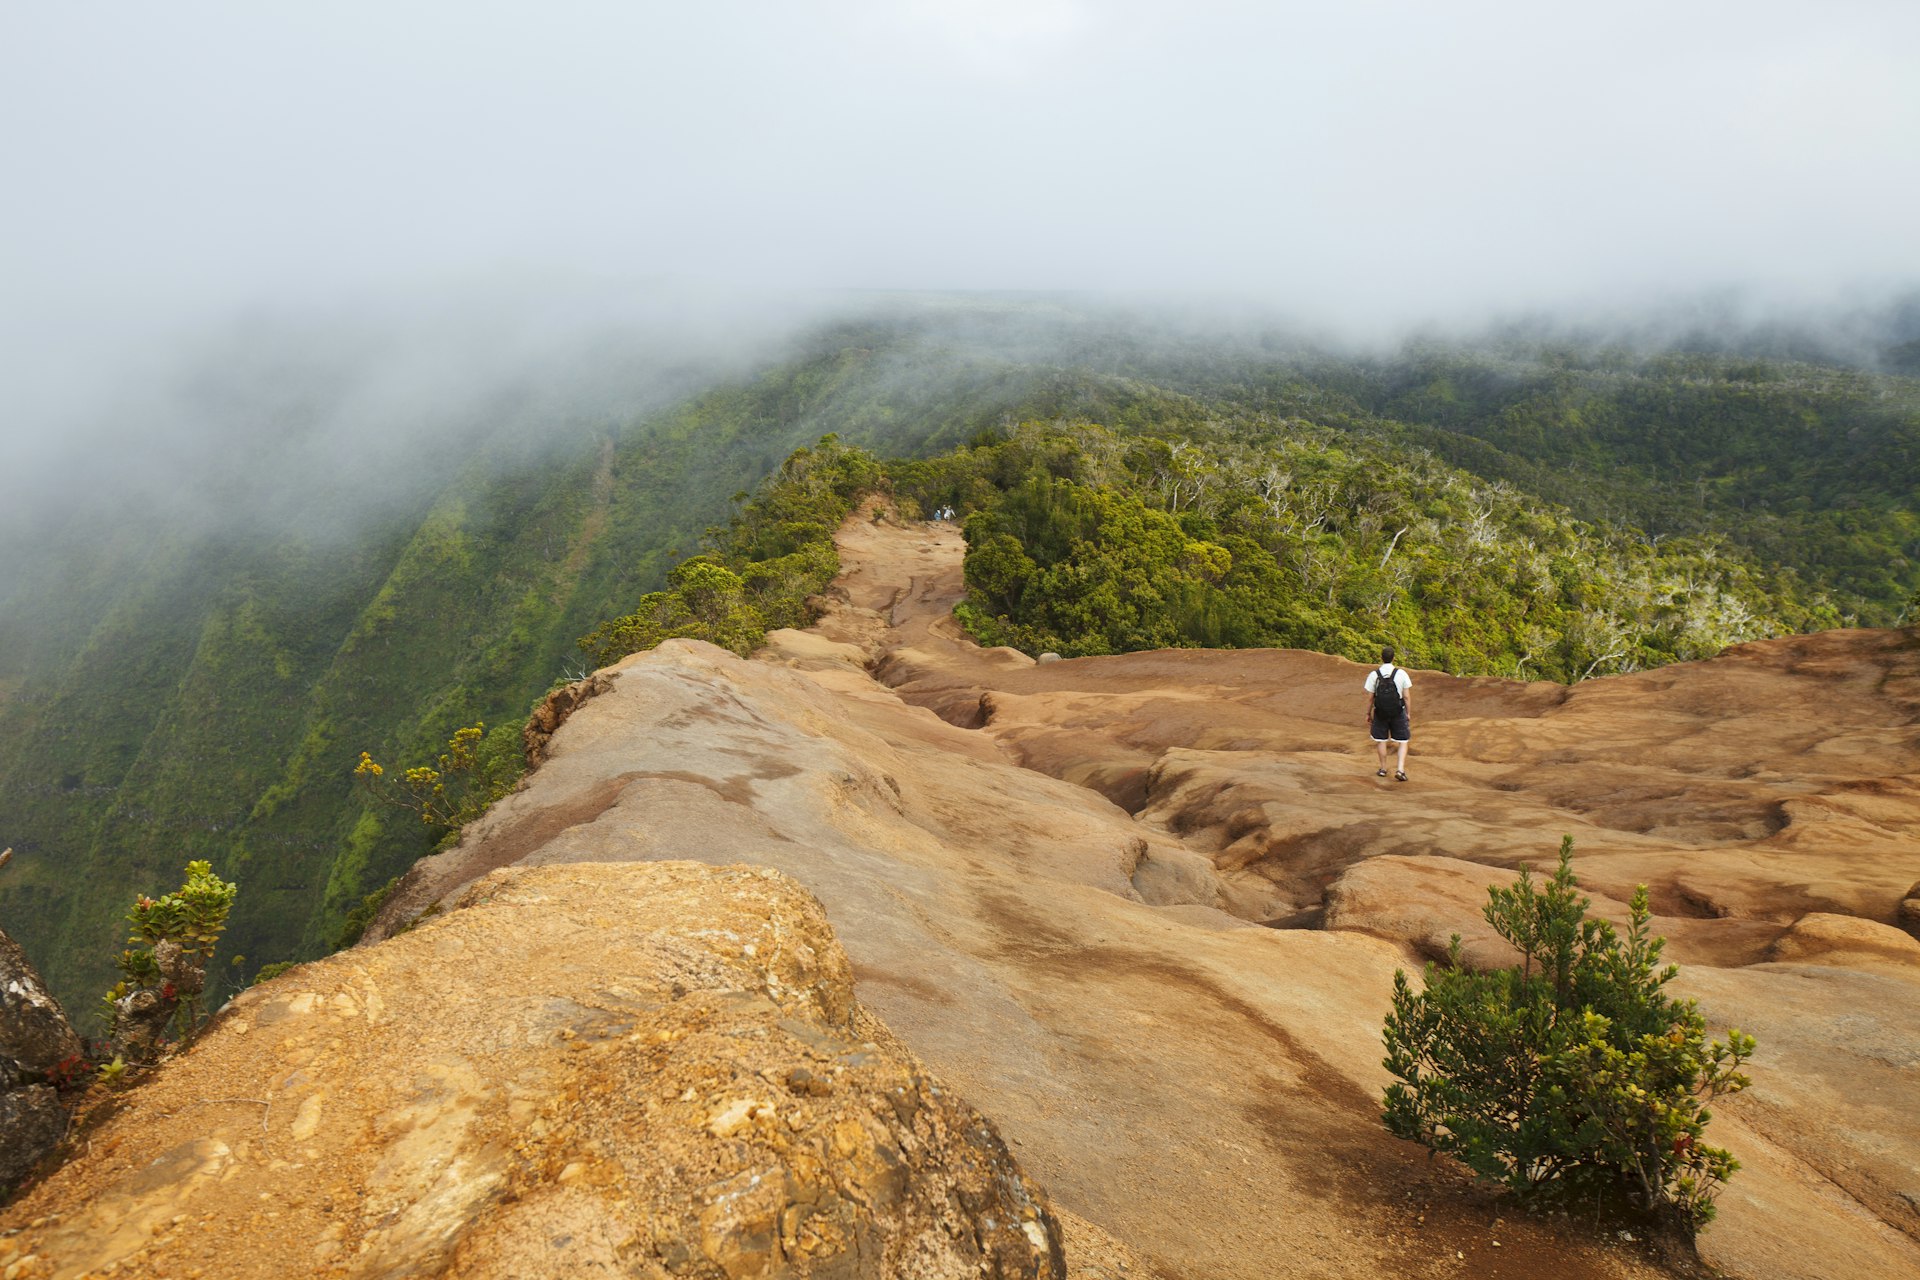 A male hiker on the Pihea Trail in Koke'e State Park on the island of Kauai, with clouds gathering above the Kalalau Valley, making the hiking trail mysterious and heavenly